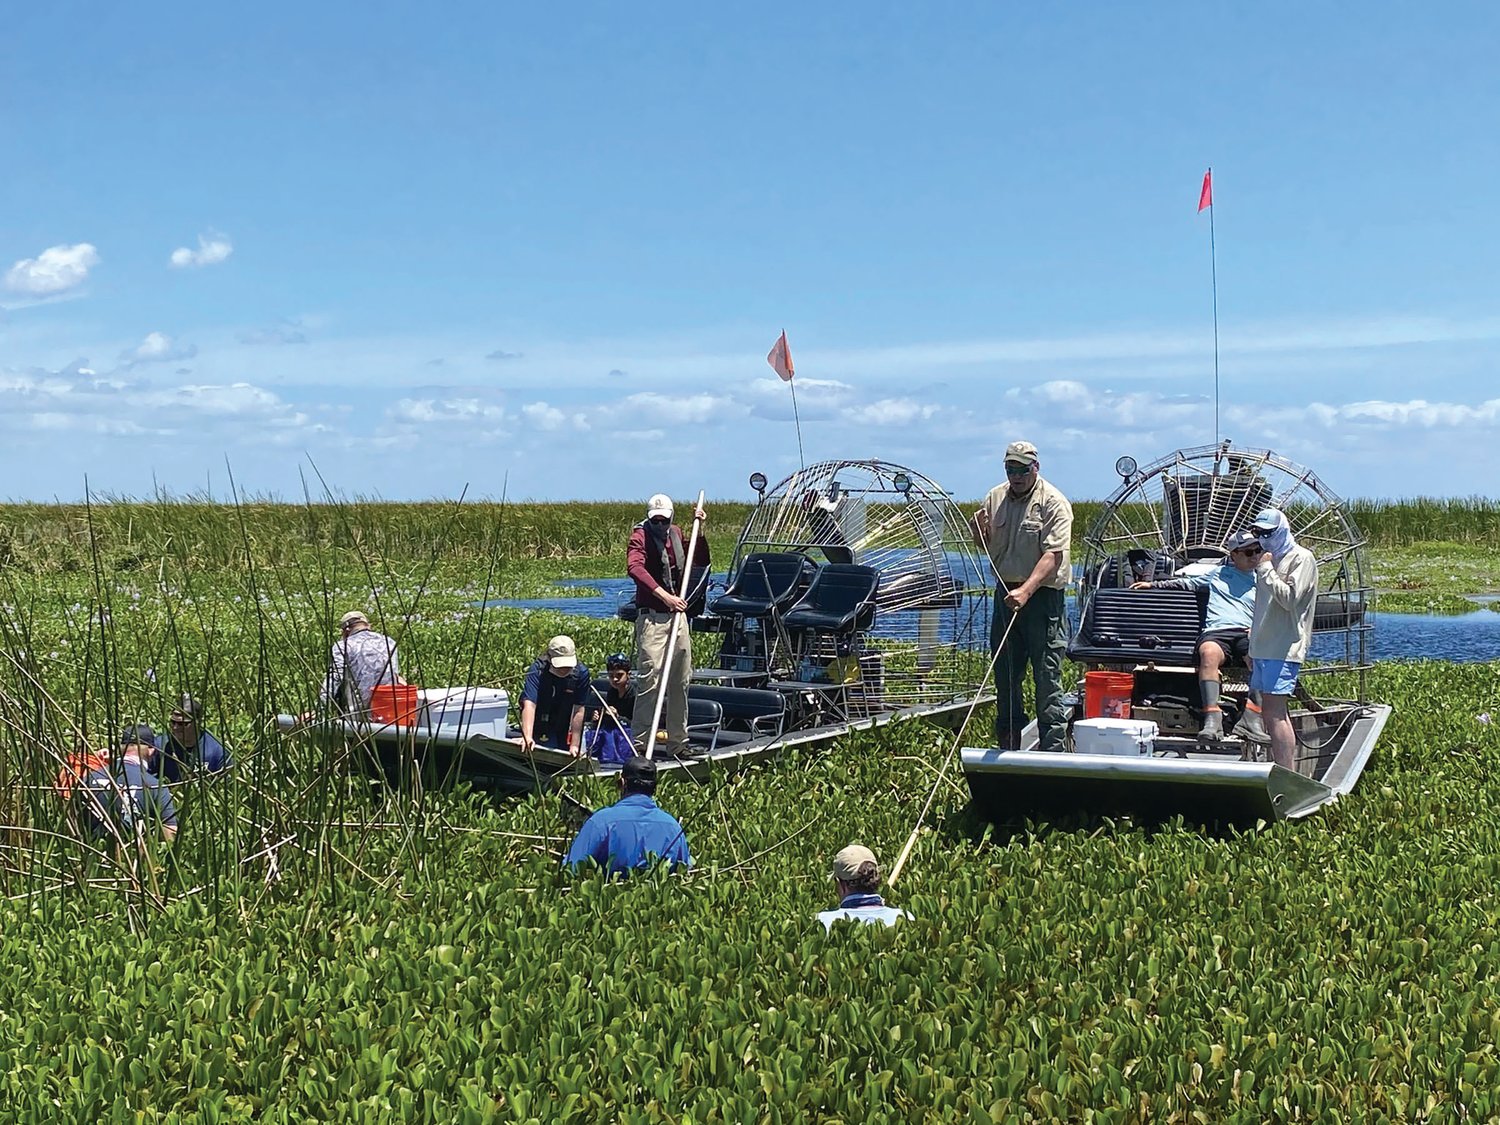 Volunteers worked all day in the hot sun to remove invasive plants on Lake Okeechobee.